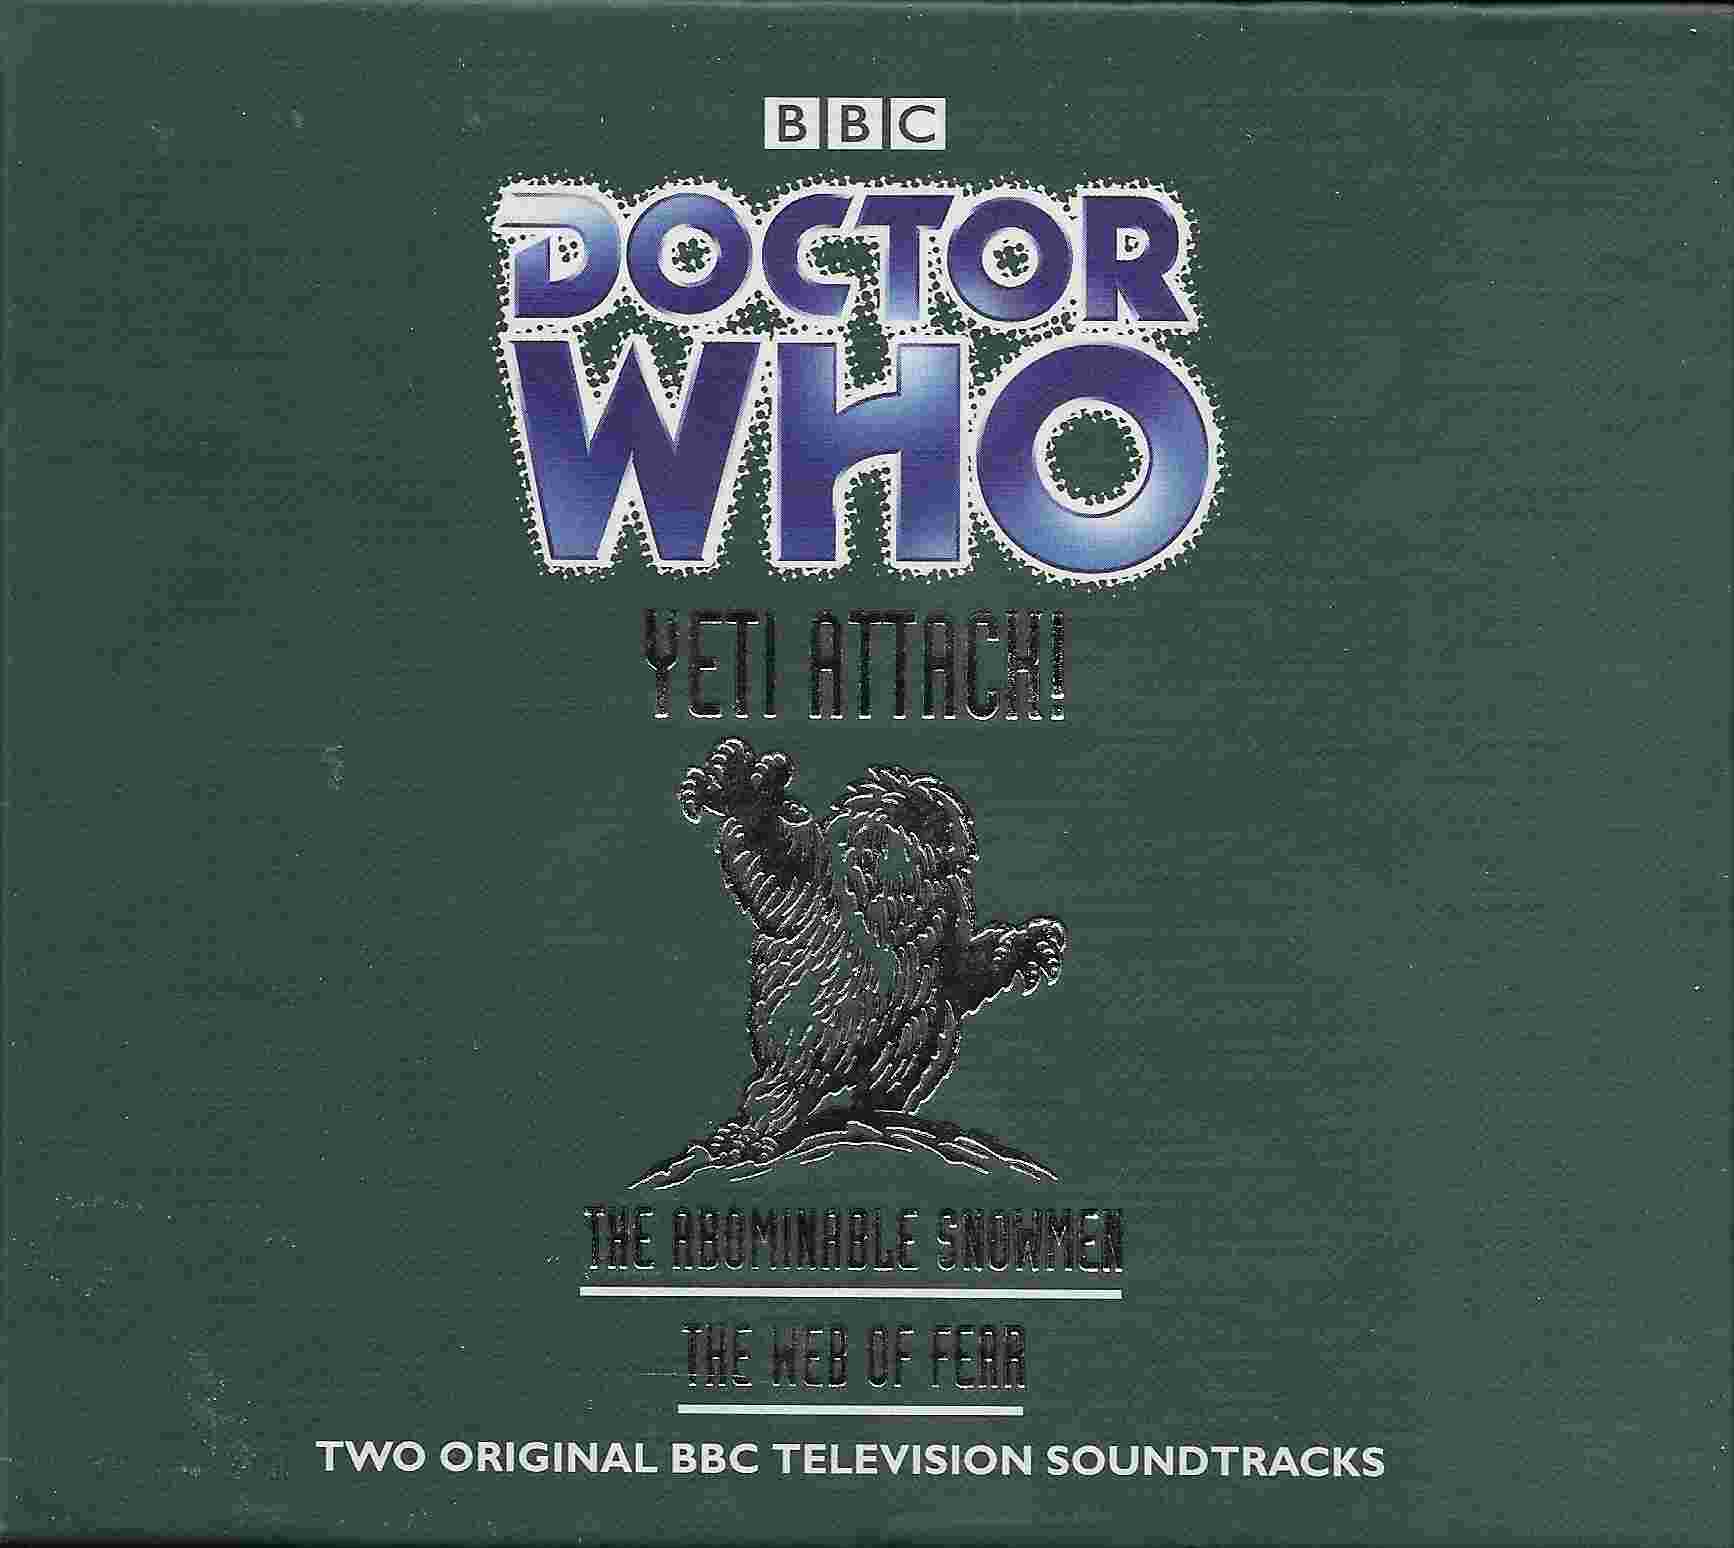 Picture of ISBN 0-563-49535-9 Doctor Who - Yeti attack! by artist Mervyn Haisman & Henry Lincoln from the BBC cds - Records and Tapes library